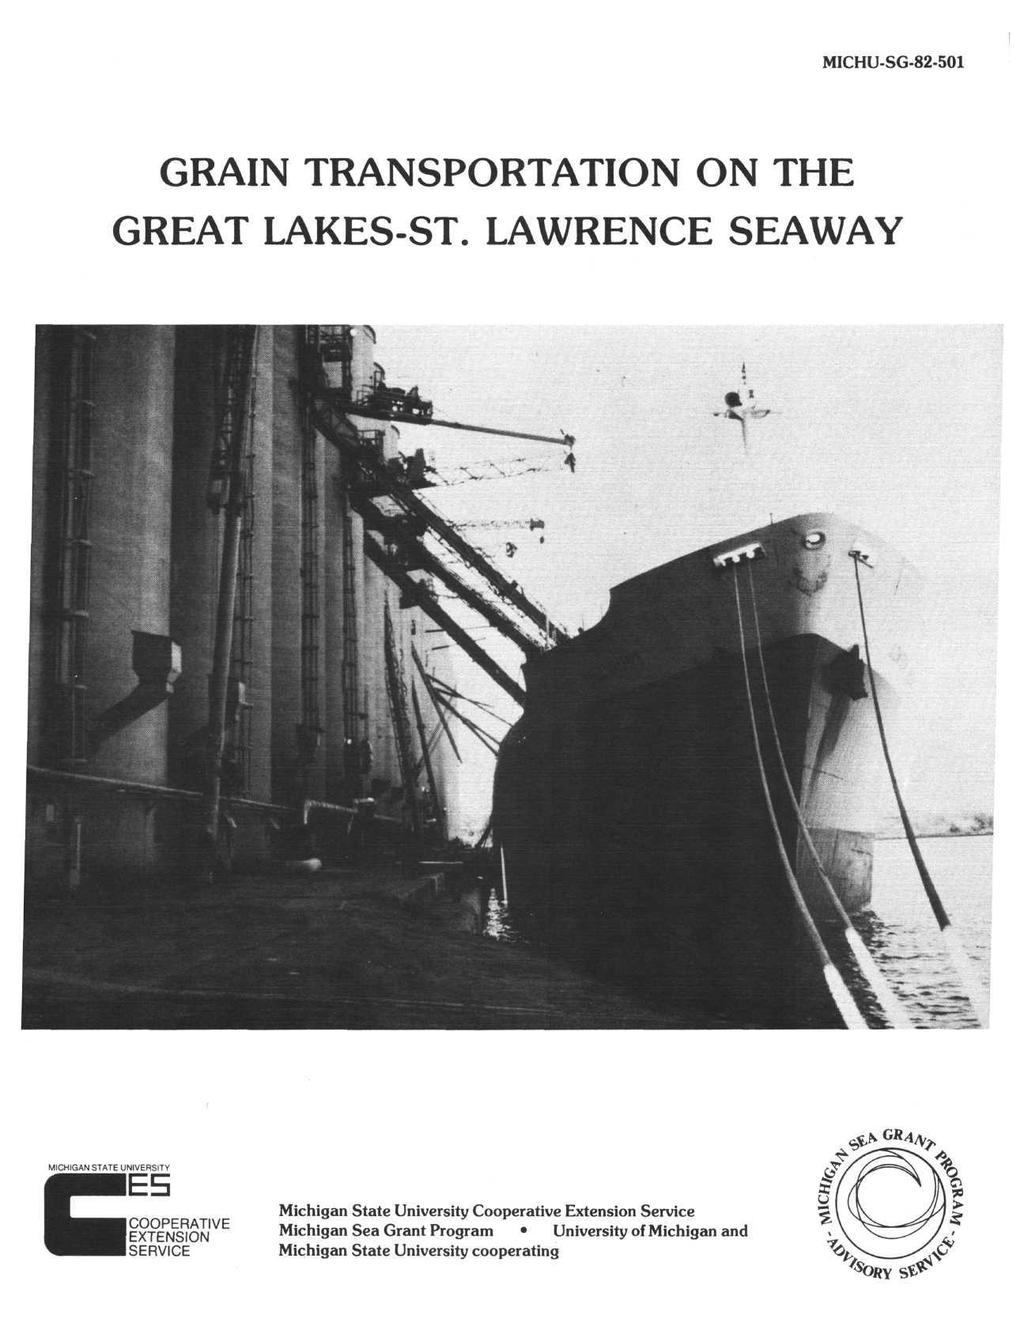 MICHU-SG-82-501 GRAIN TRANSPORTATION ON THE GREAT LAKES-ST.